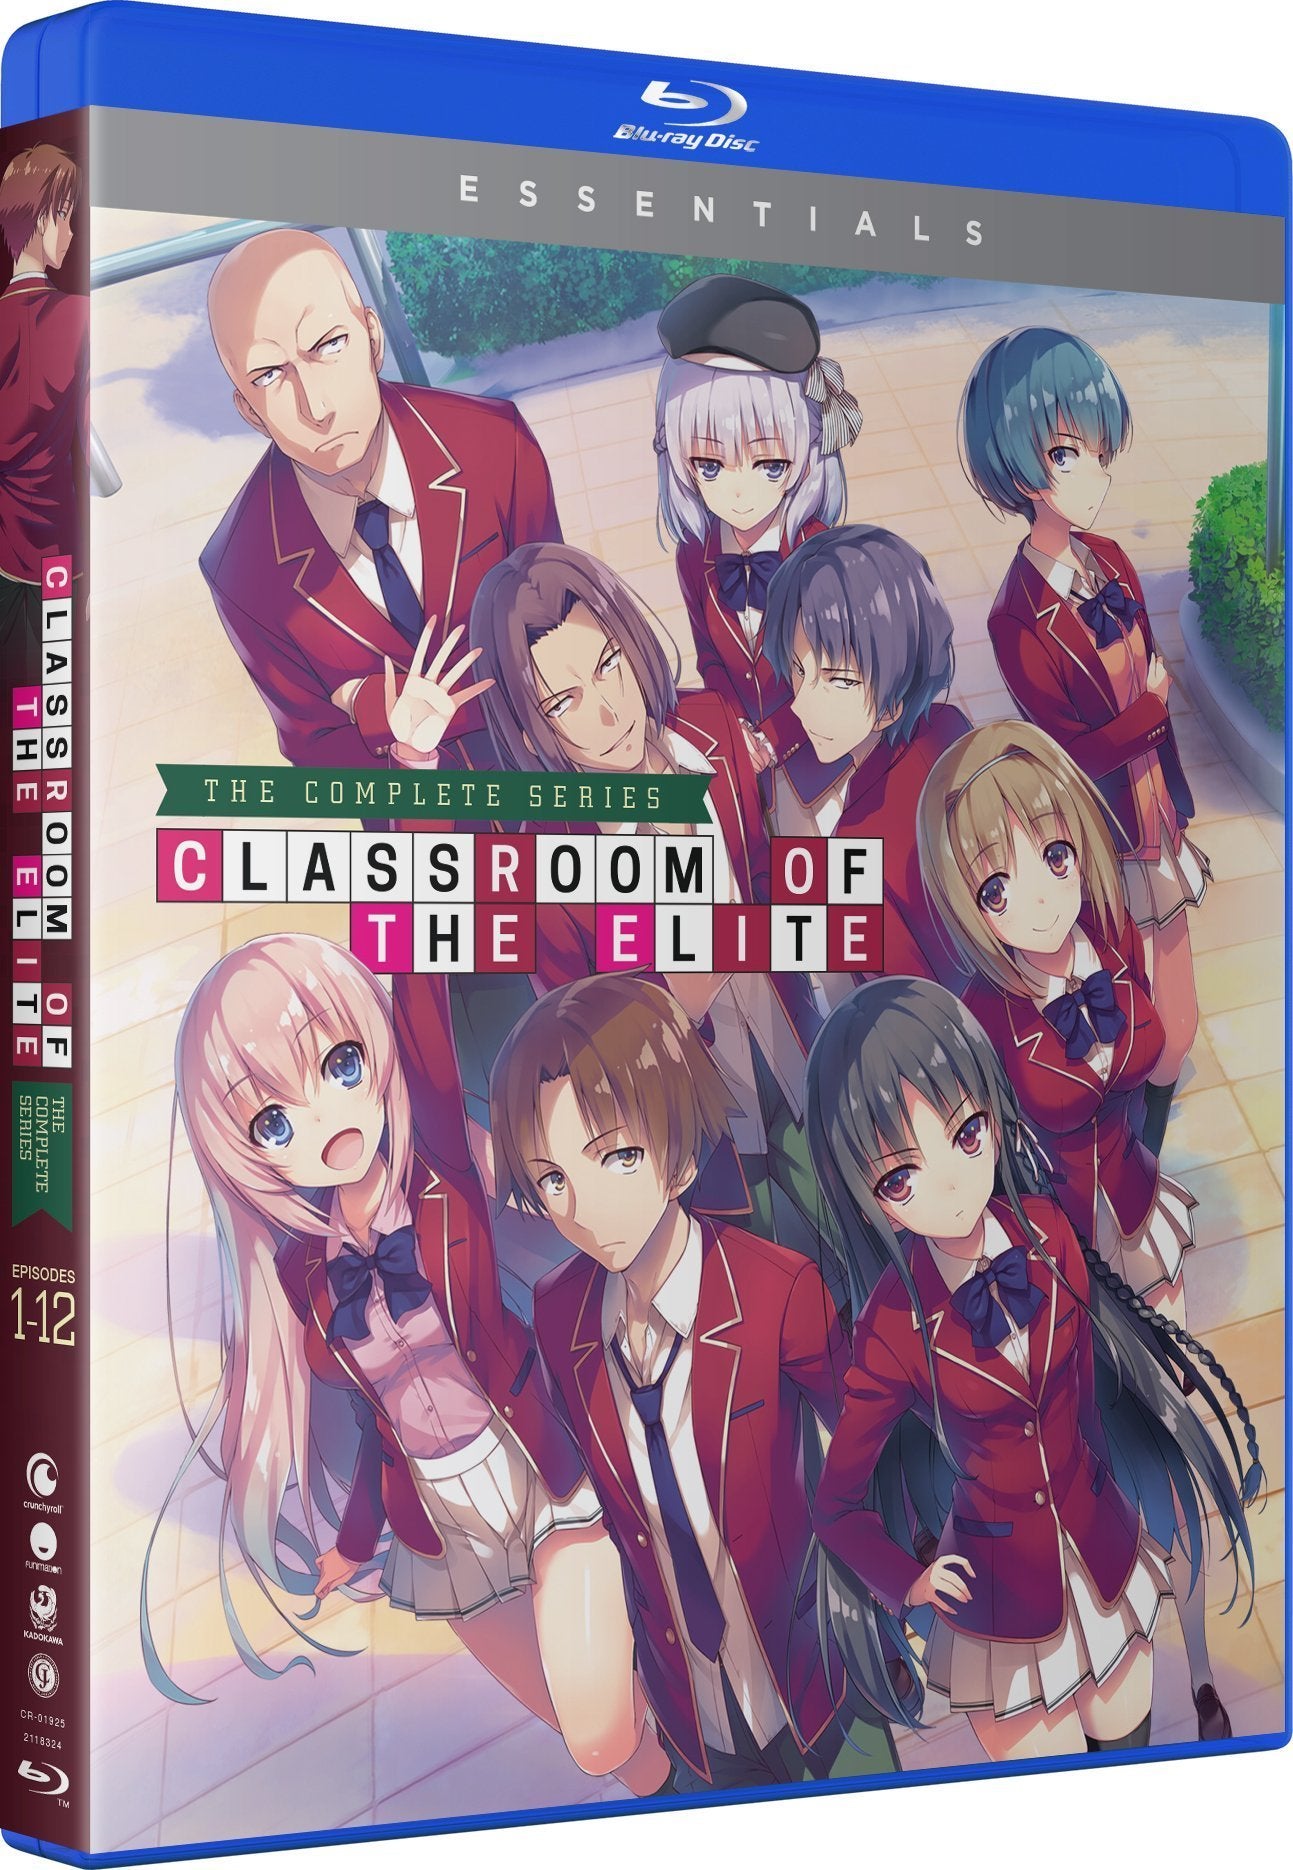 Classroom of the Elite - The Complete Series - Essentials - Blu-ray image count 1